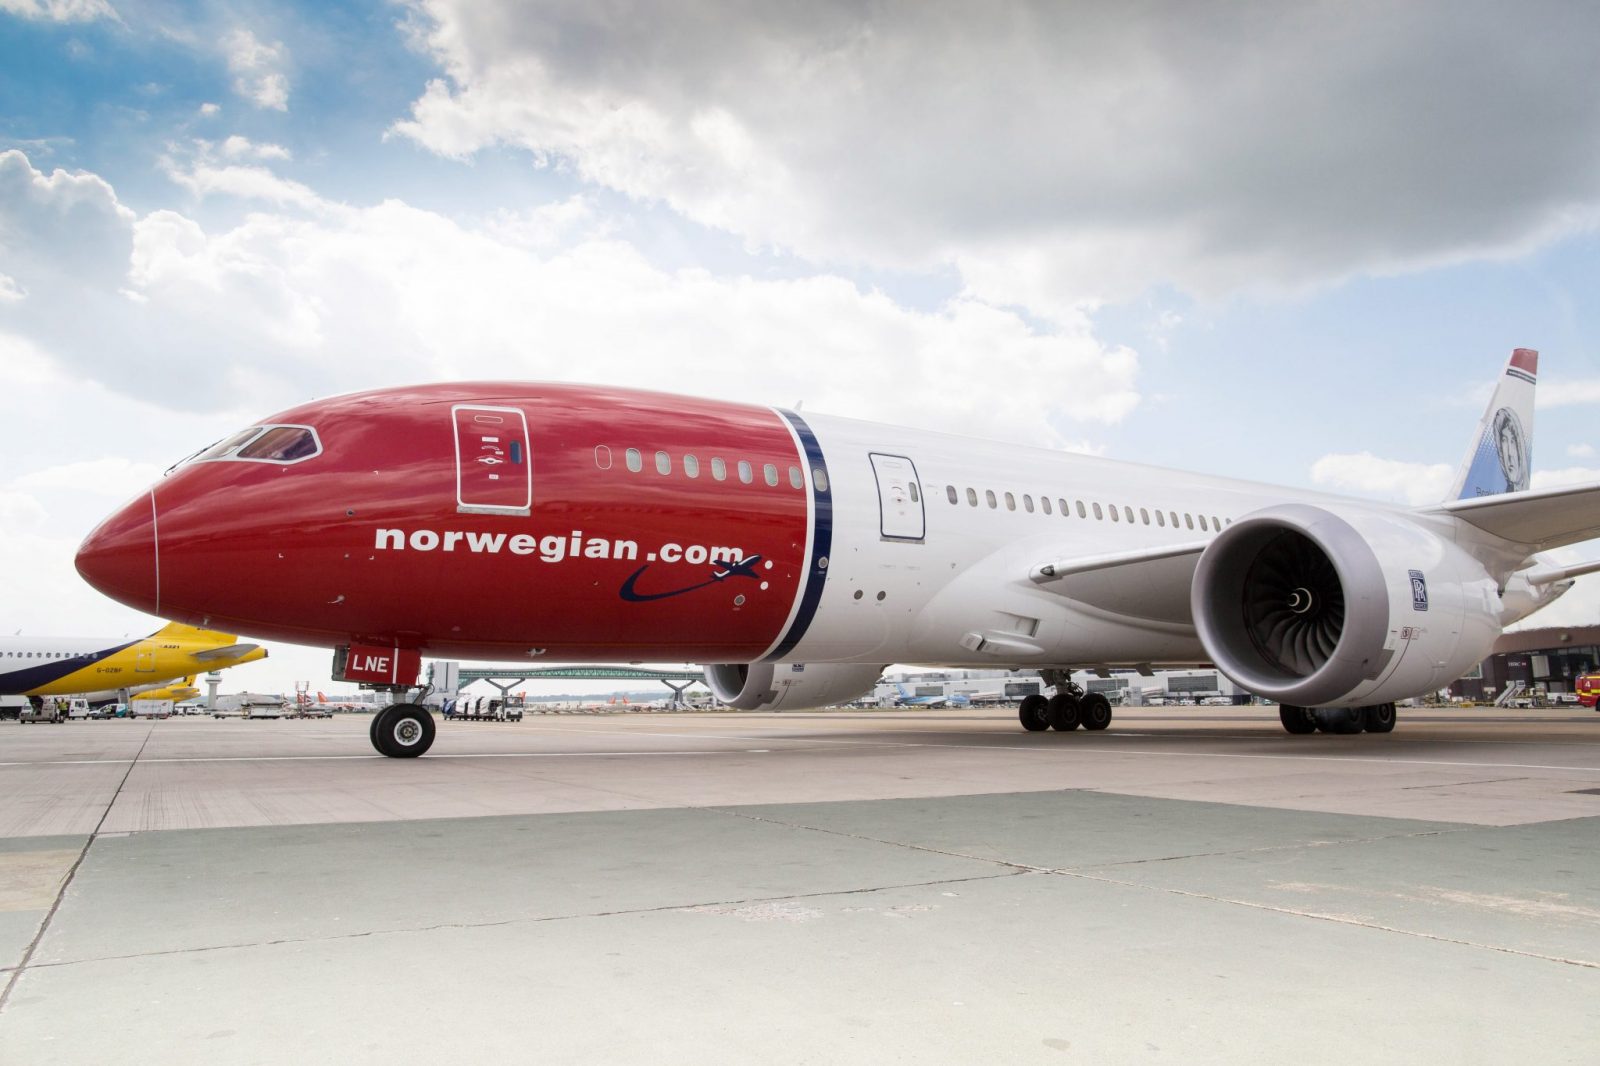 Norwegian Plans to Launch Flights from Heathrow with a Possible New Route to Orlando, Florida